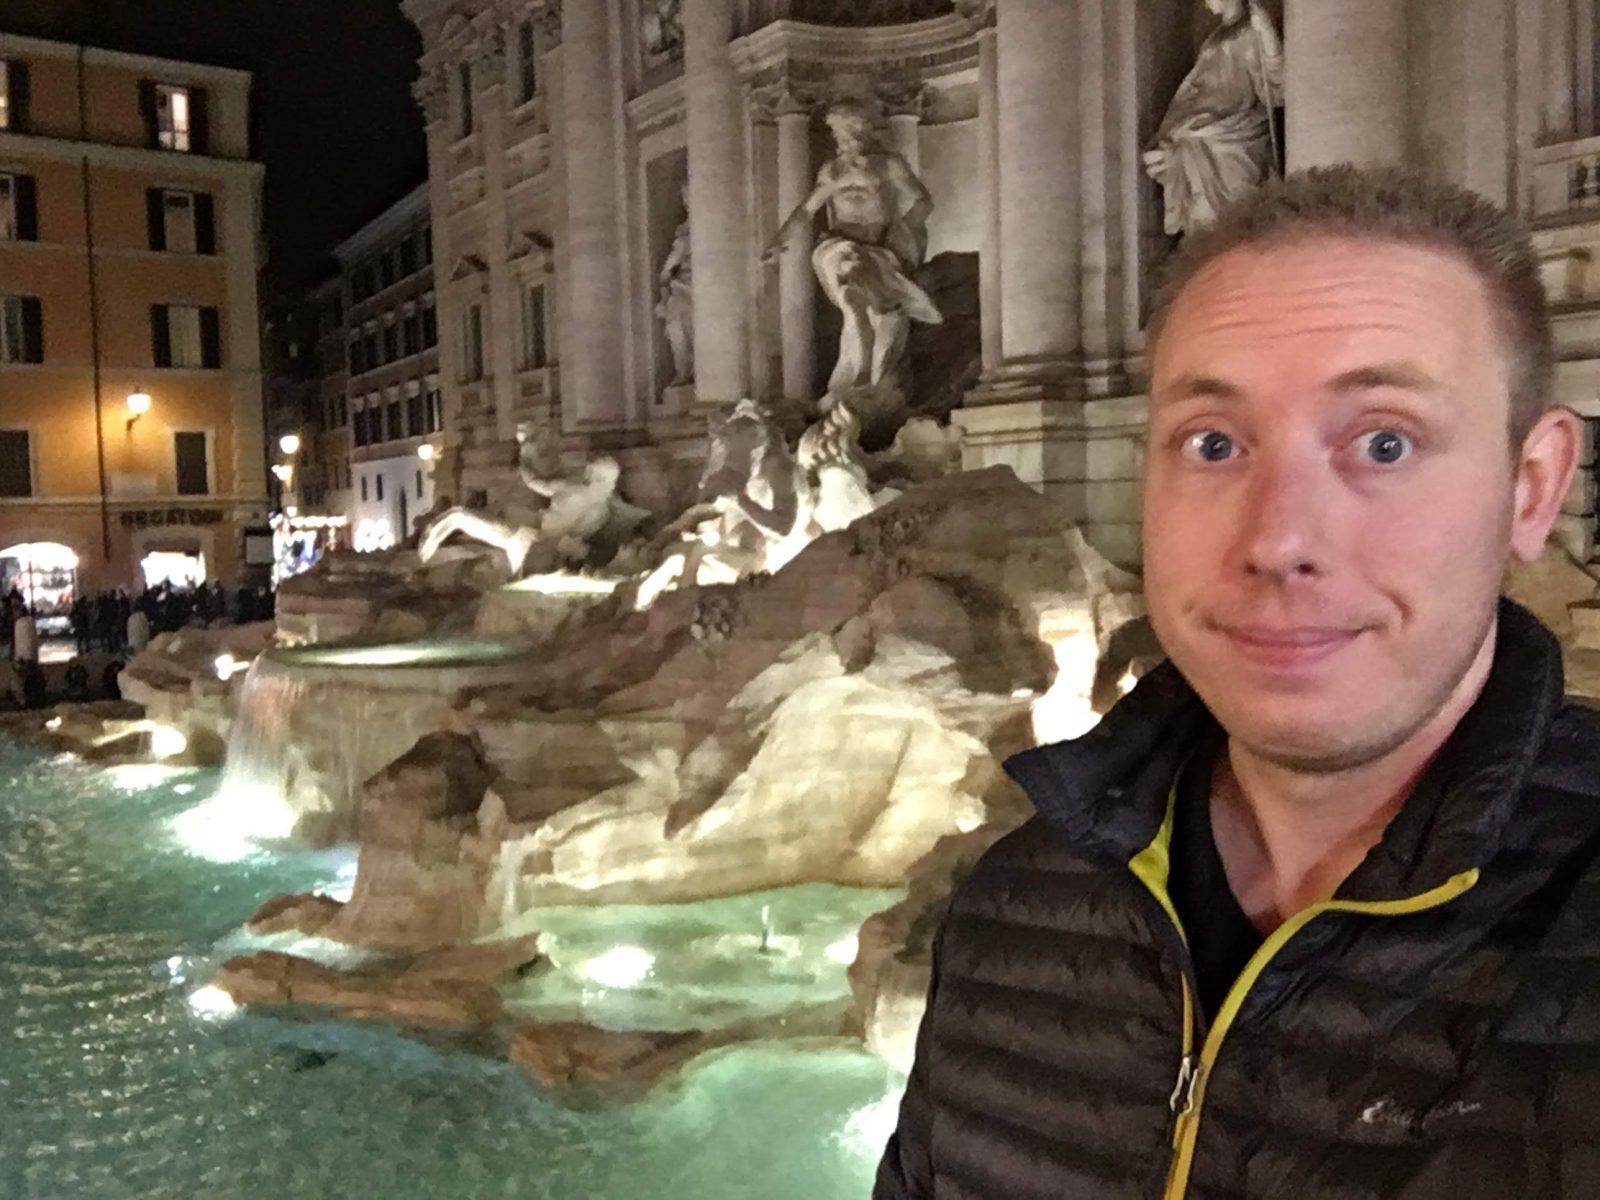 I Traveled To Rome During Off-Peak Dates of February And Was Able to Enjoy Popular Sites Like The Trevi Fountain All To Ourselves